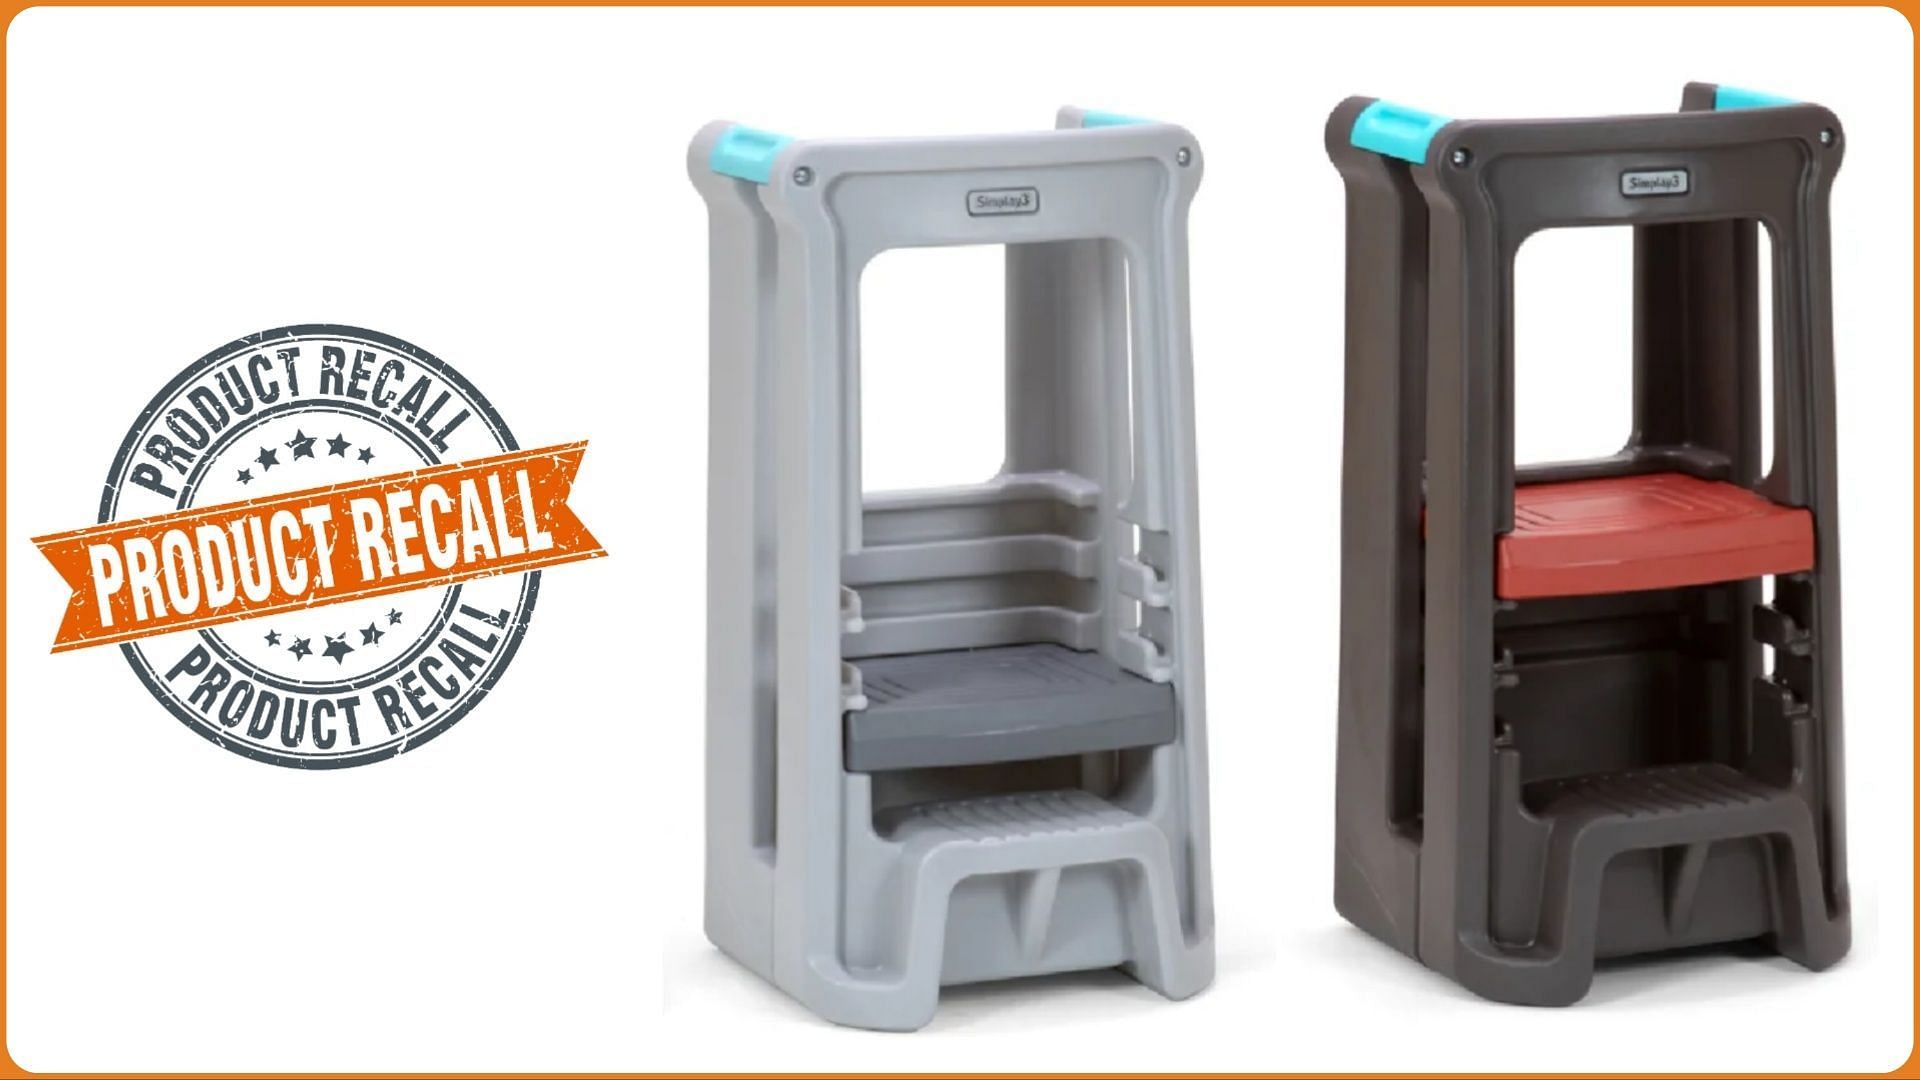 The Simplay3 Company recalls Simplay3 Toddler Towers over fall and injury hazard concerns (Image via CPSC / Health Canada)